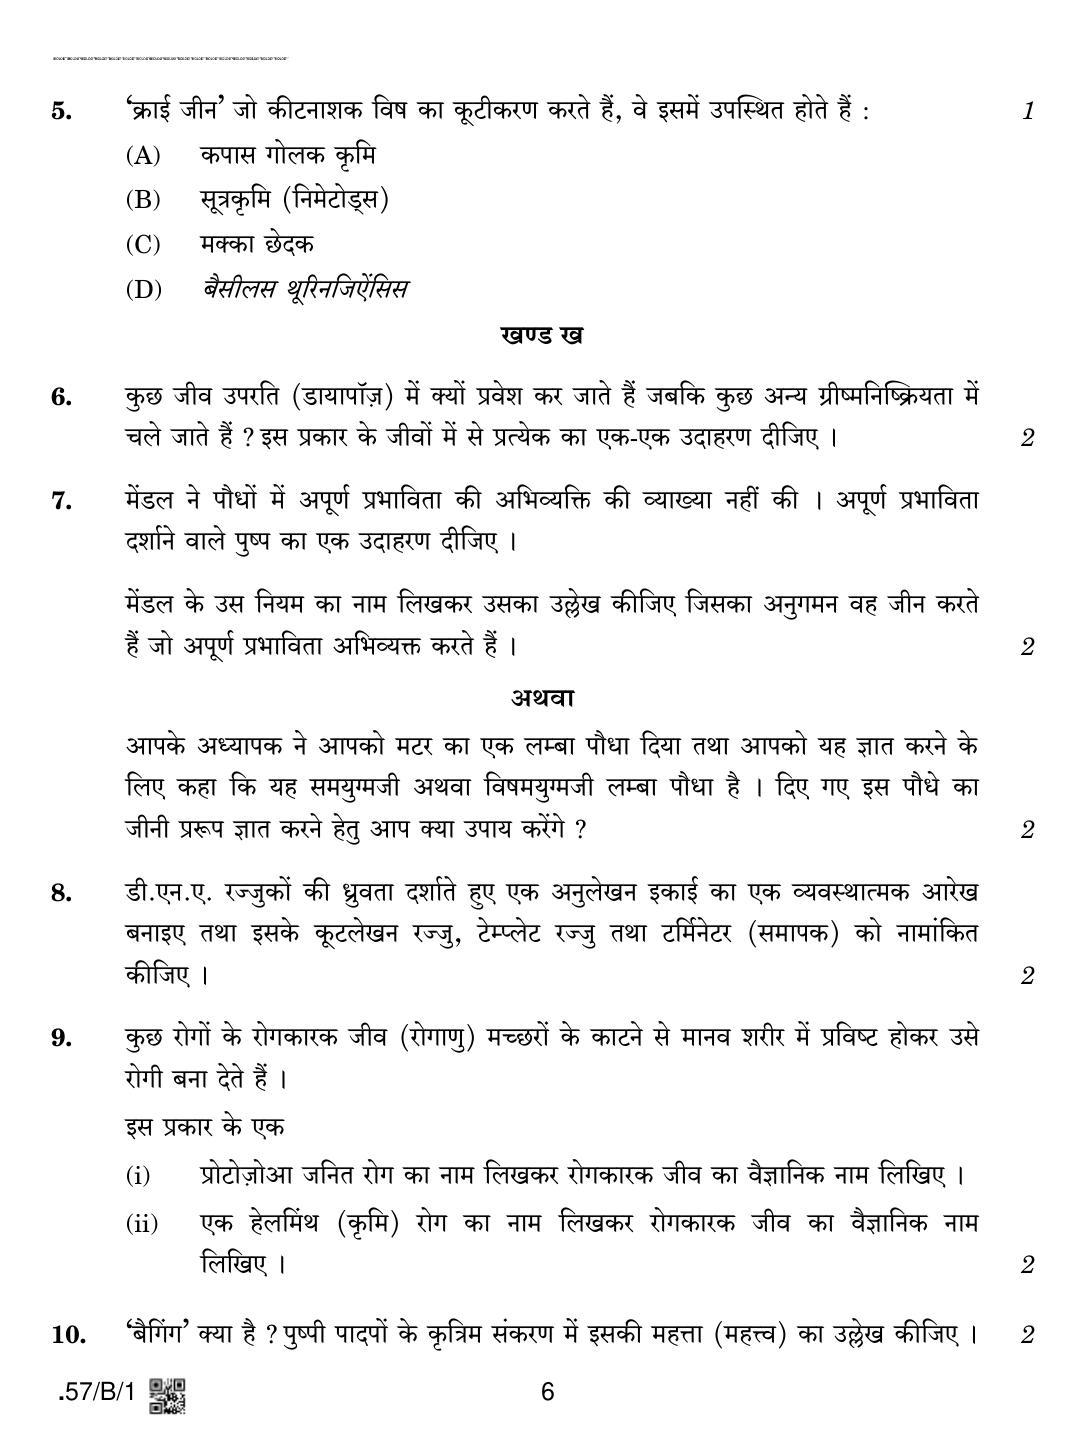 CBSE Class 12 57-C-1 - Biology 2020 Compartment Question Paper - Page 6